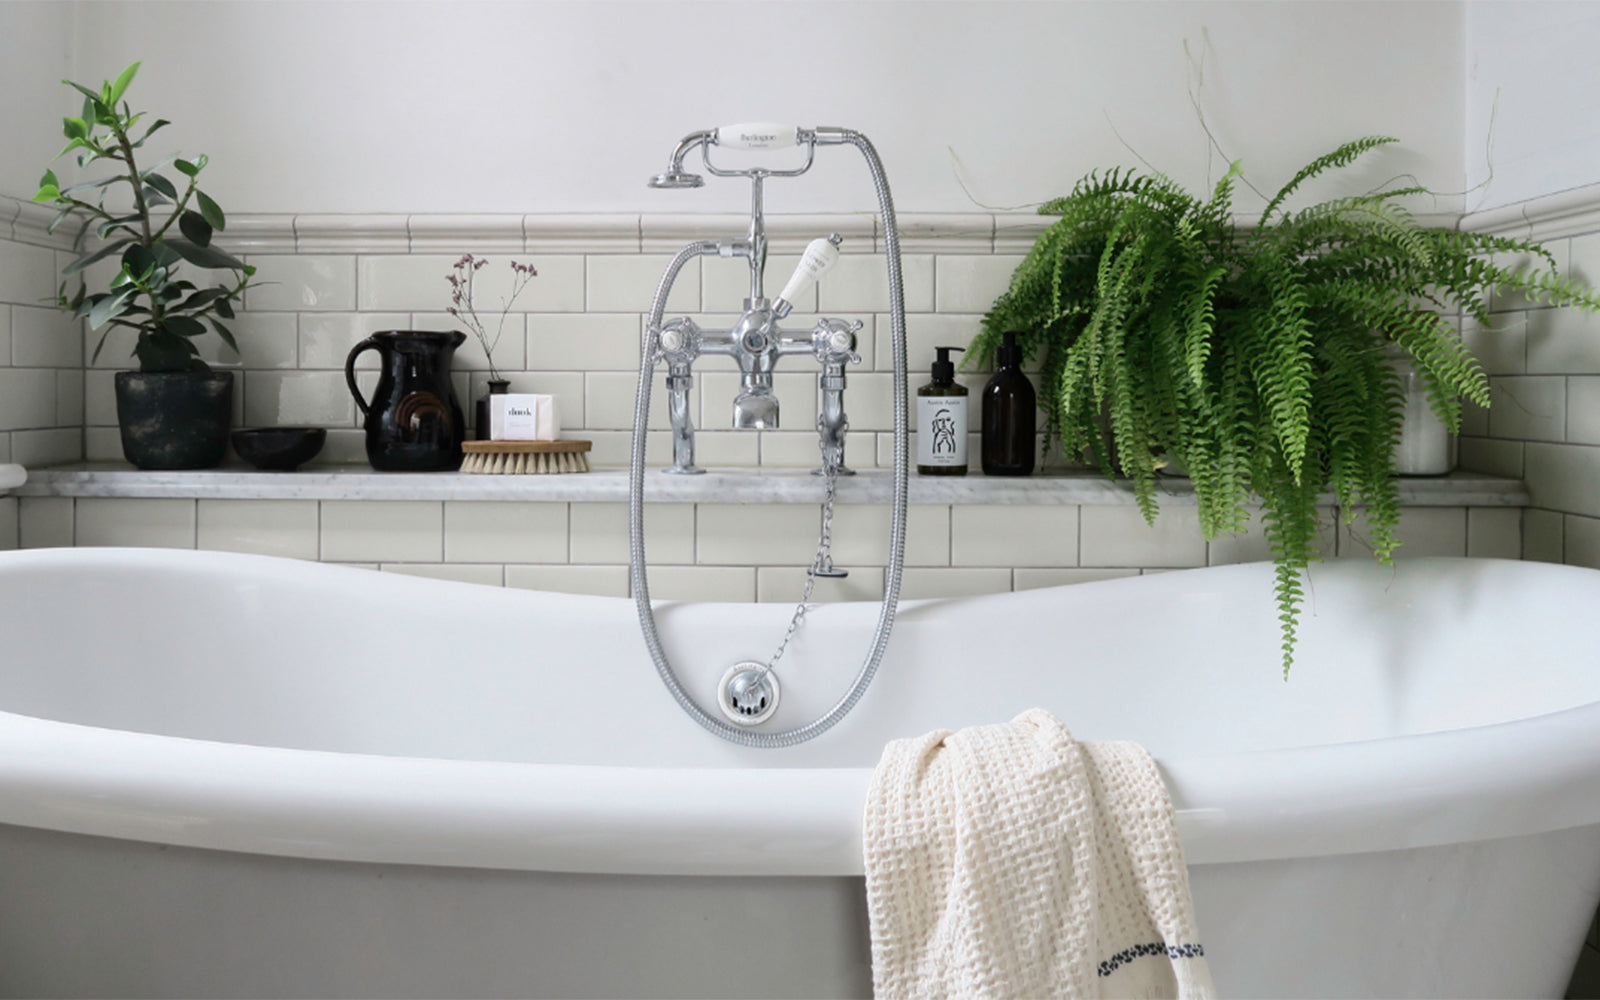 Plants and beauty products surrounding a bath